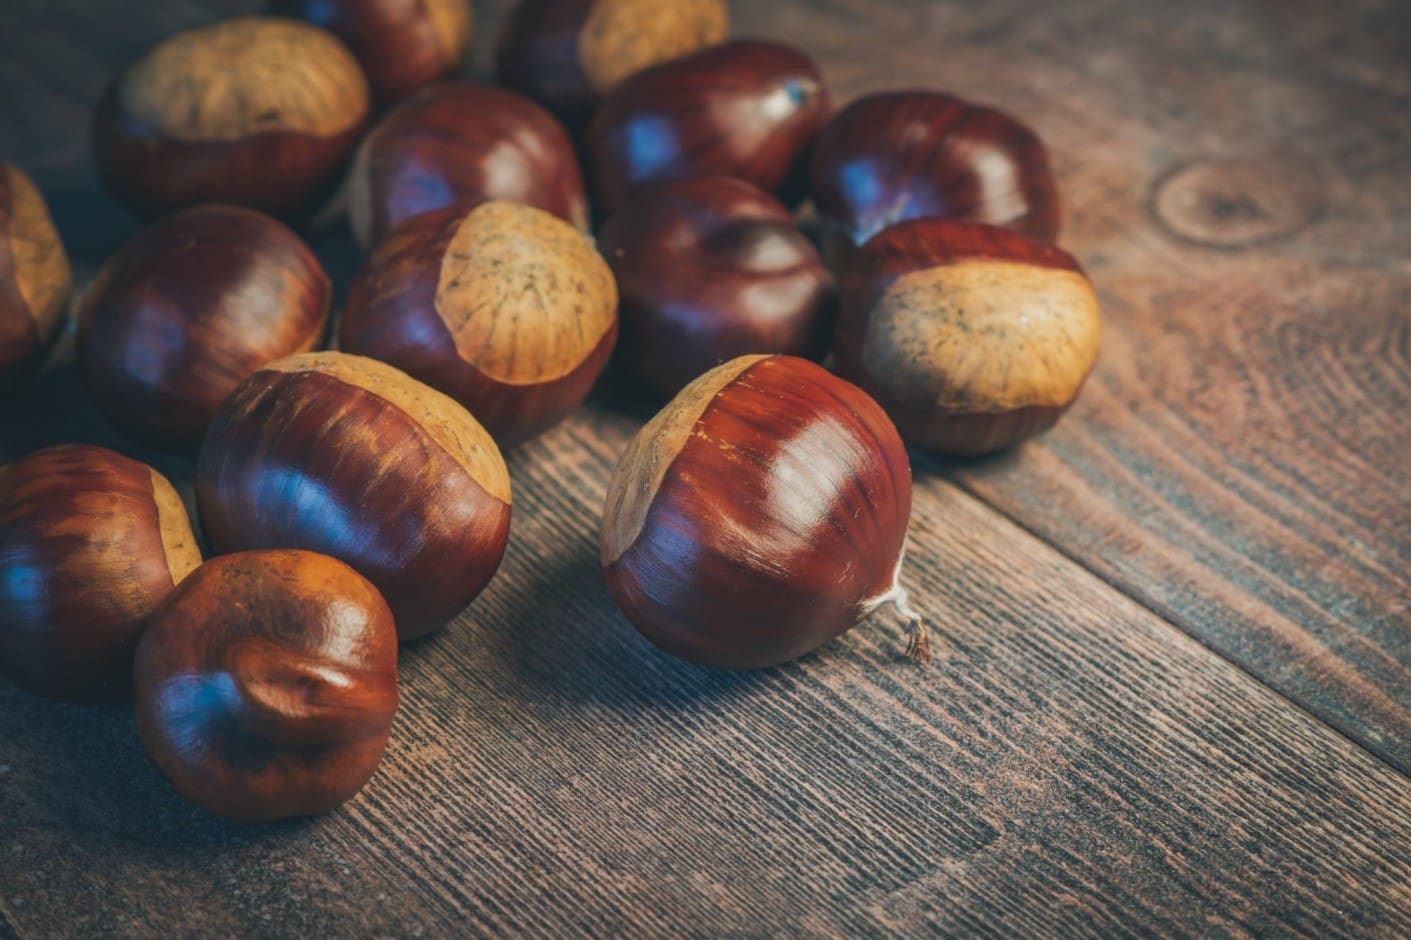 A pile of chestnuts on top of a wooden table.